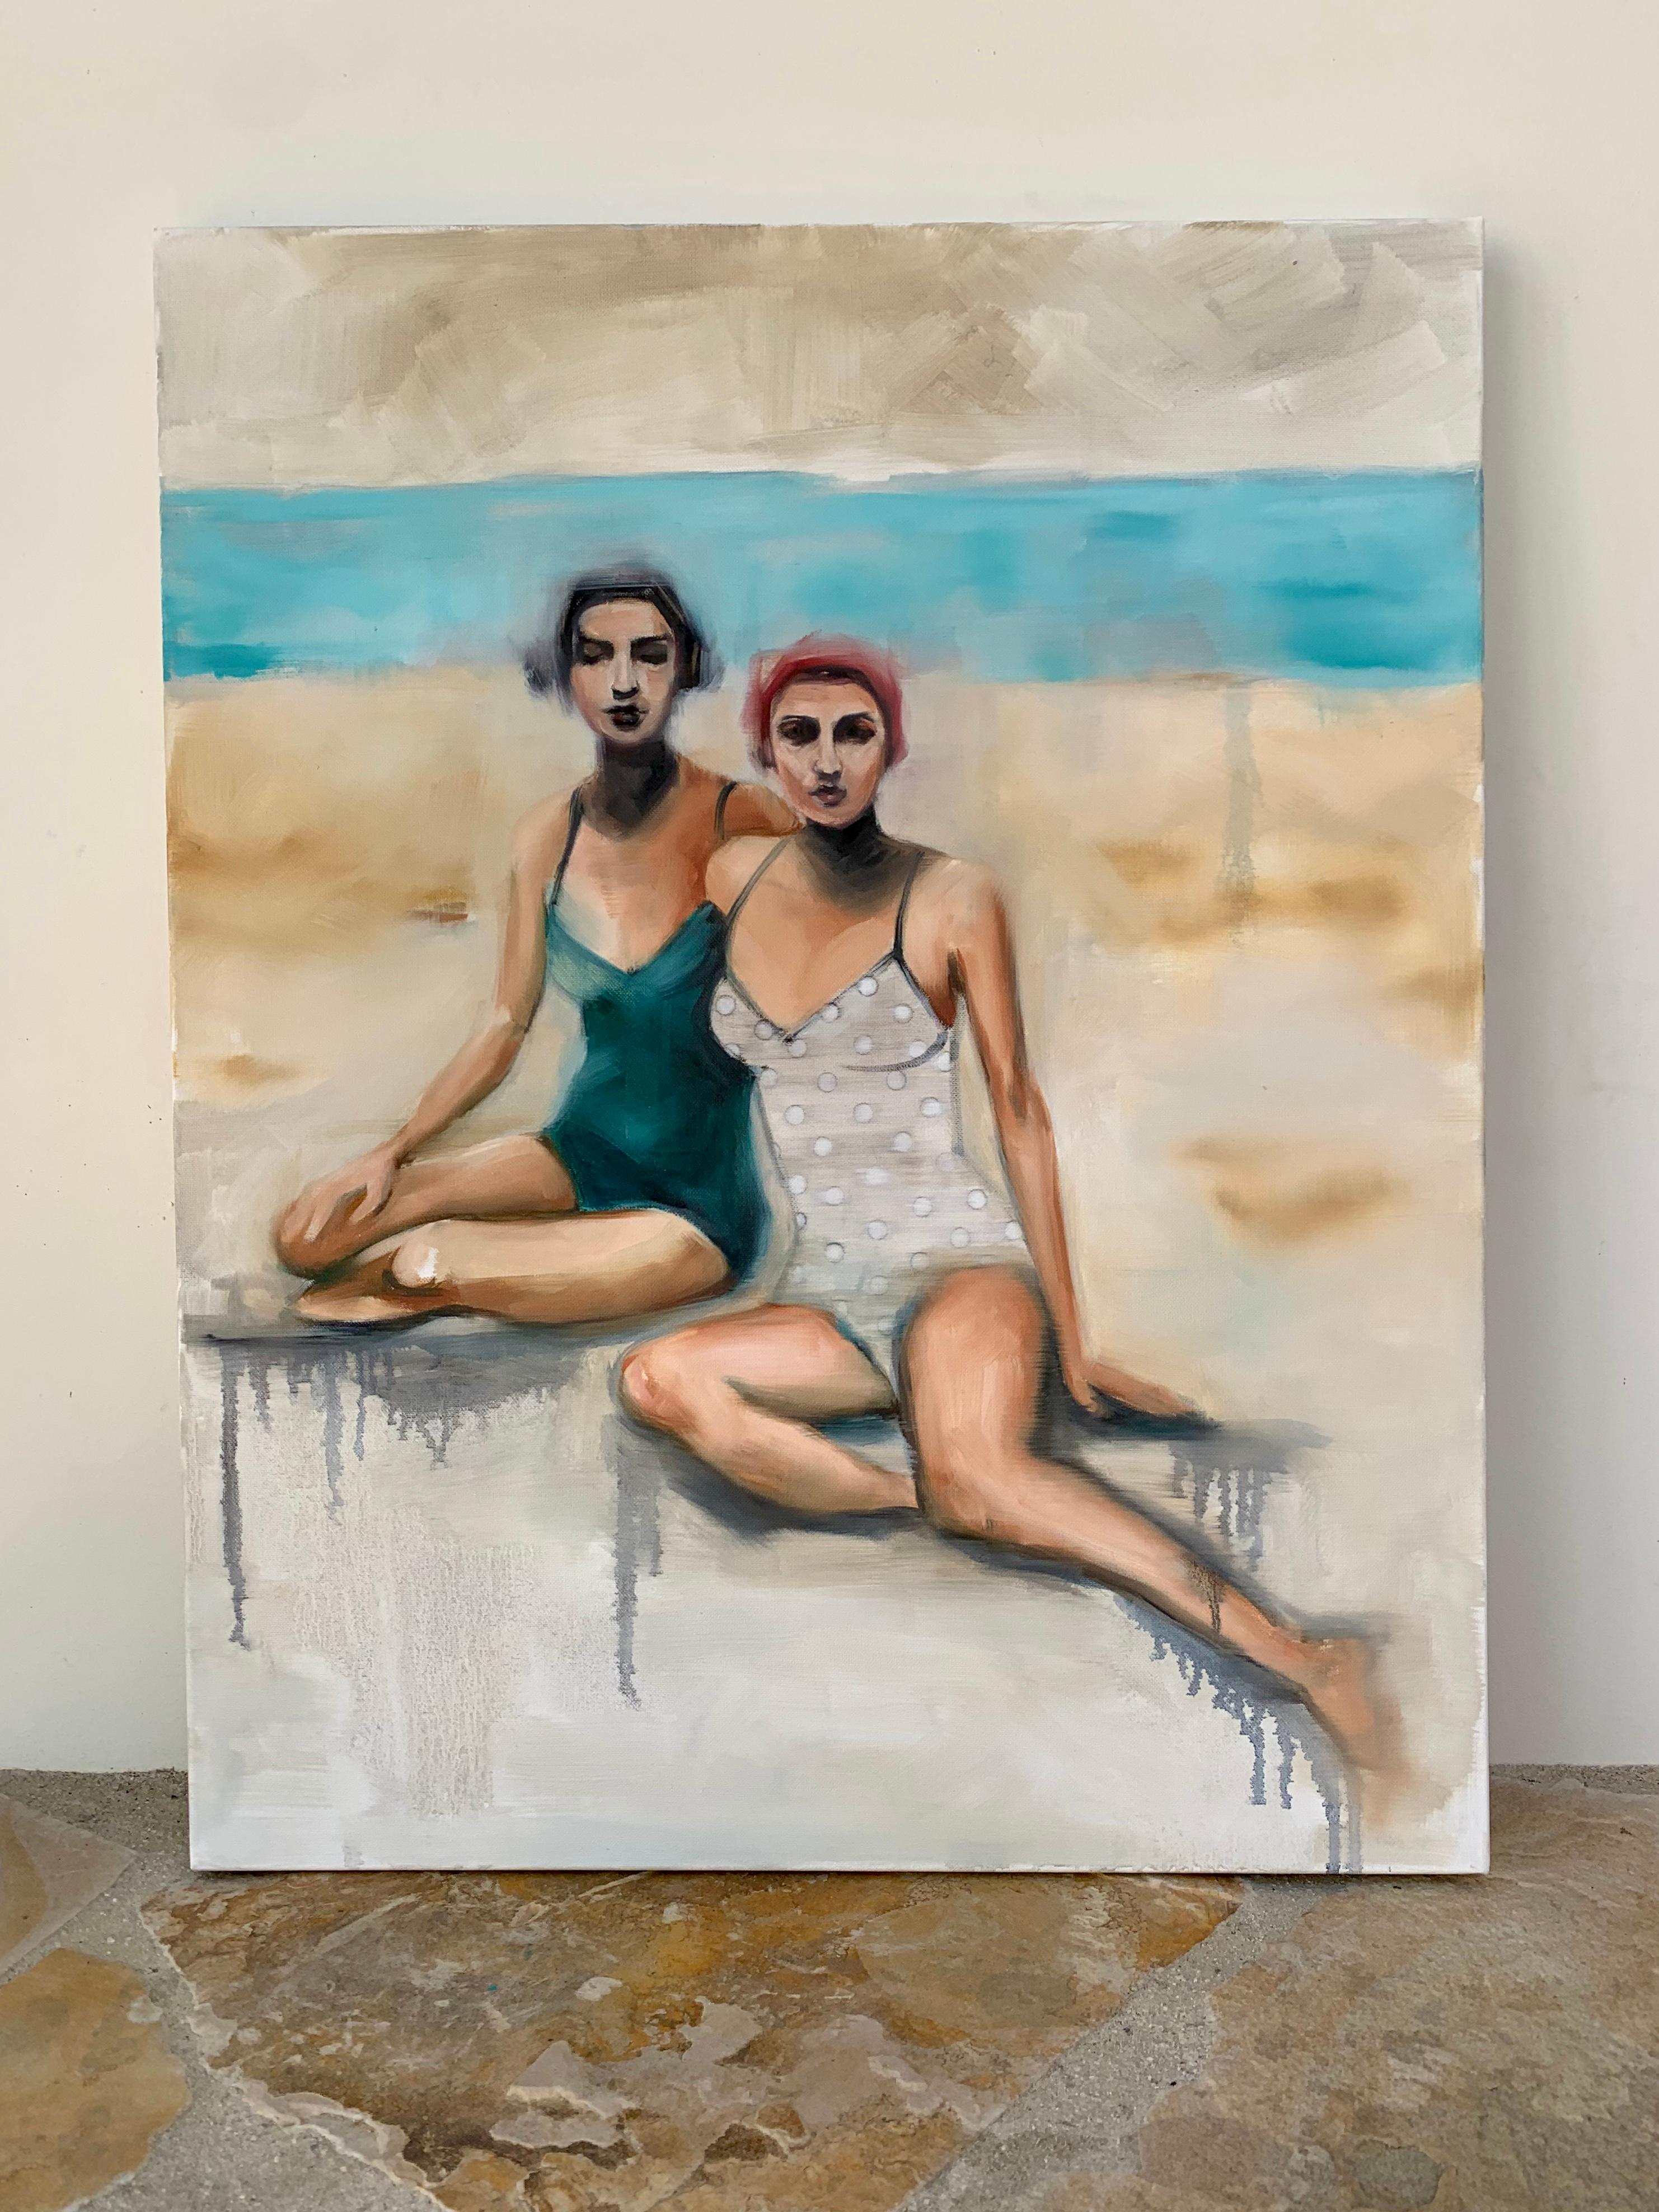 <p>Artist Comments<br />Two models in vintage bathing suits, one with a red swim cap, pose together on a sandy beach. 